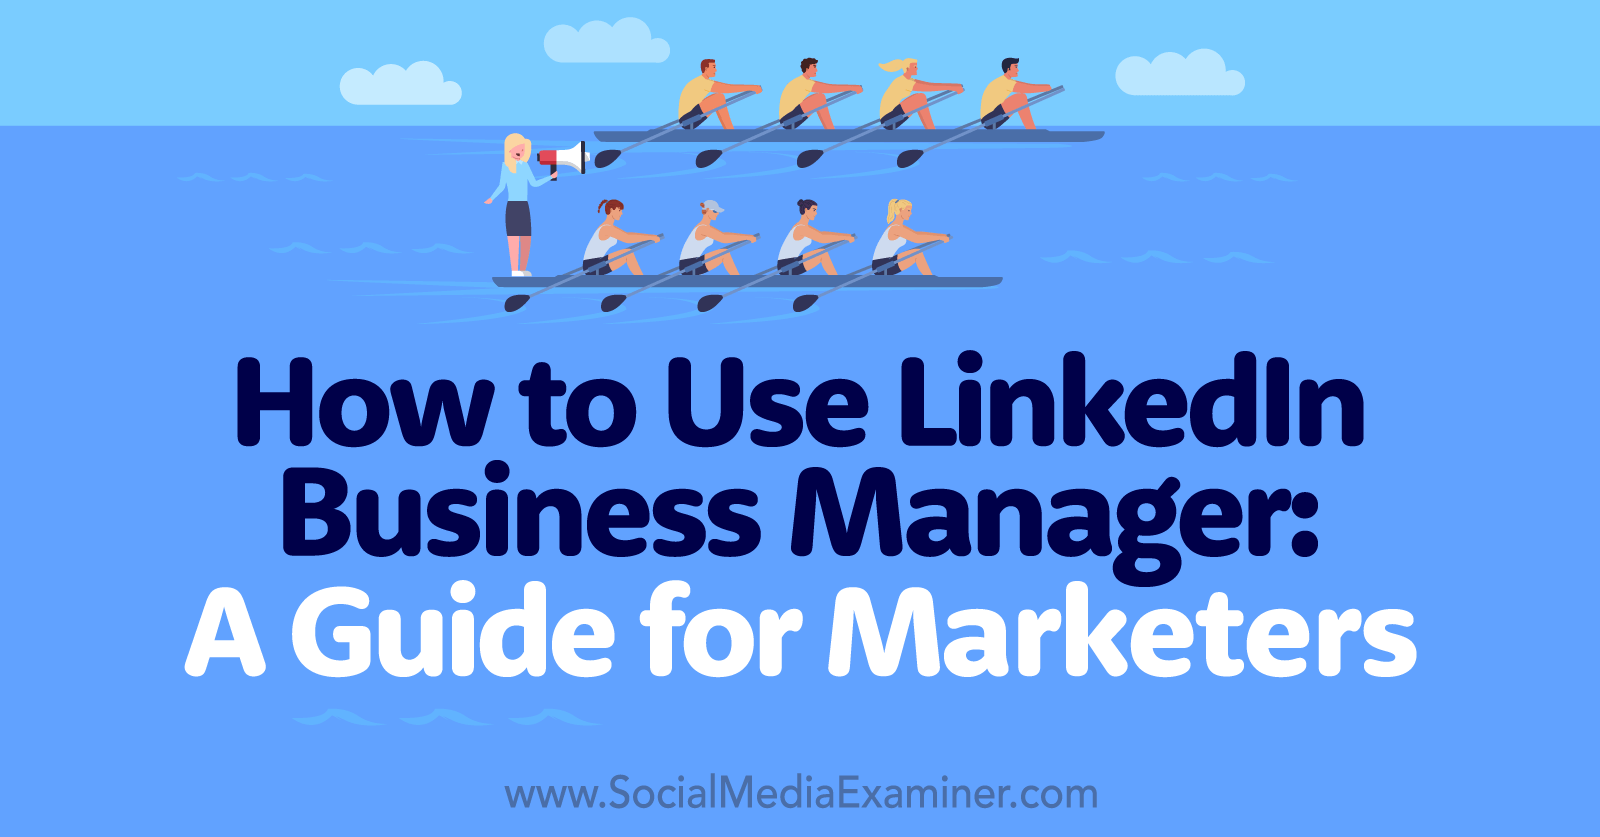 How to Use LinkedIn Business Manager: A Guide for Marketers-Social Media Examiner